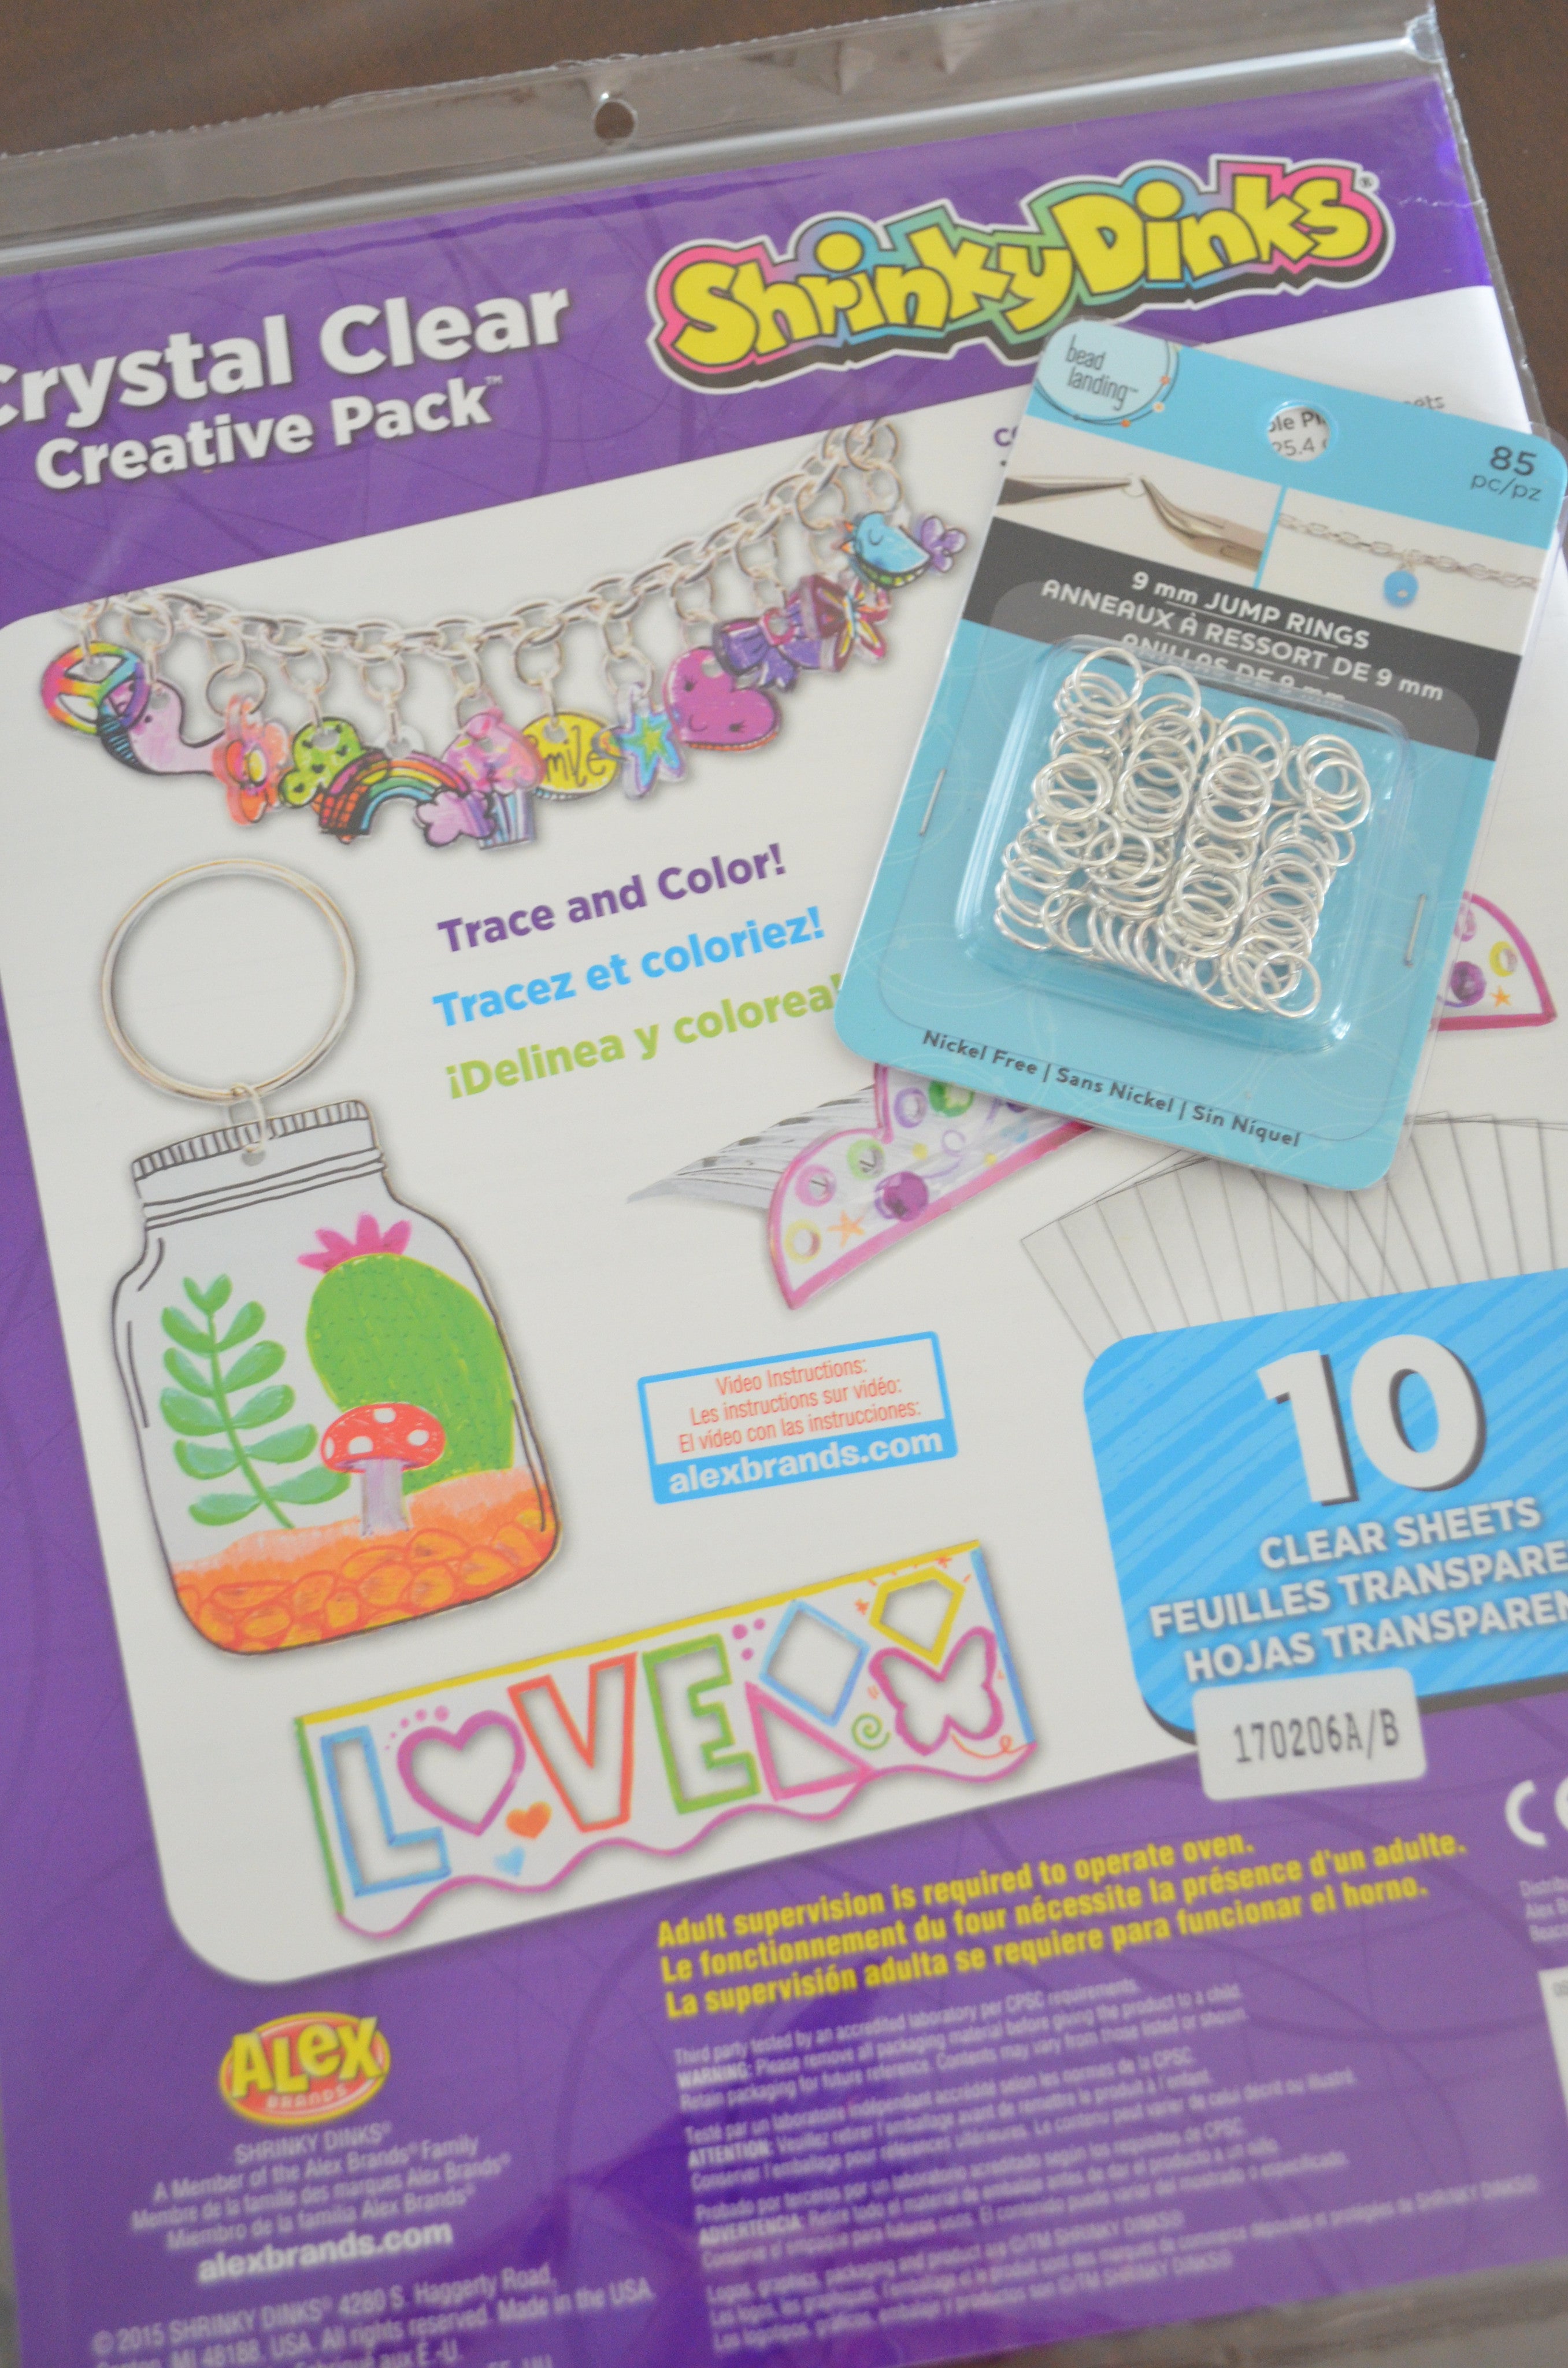 Shrinky Dink Handprint Keychains-Little Sprouts Learning